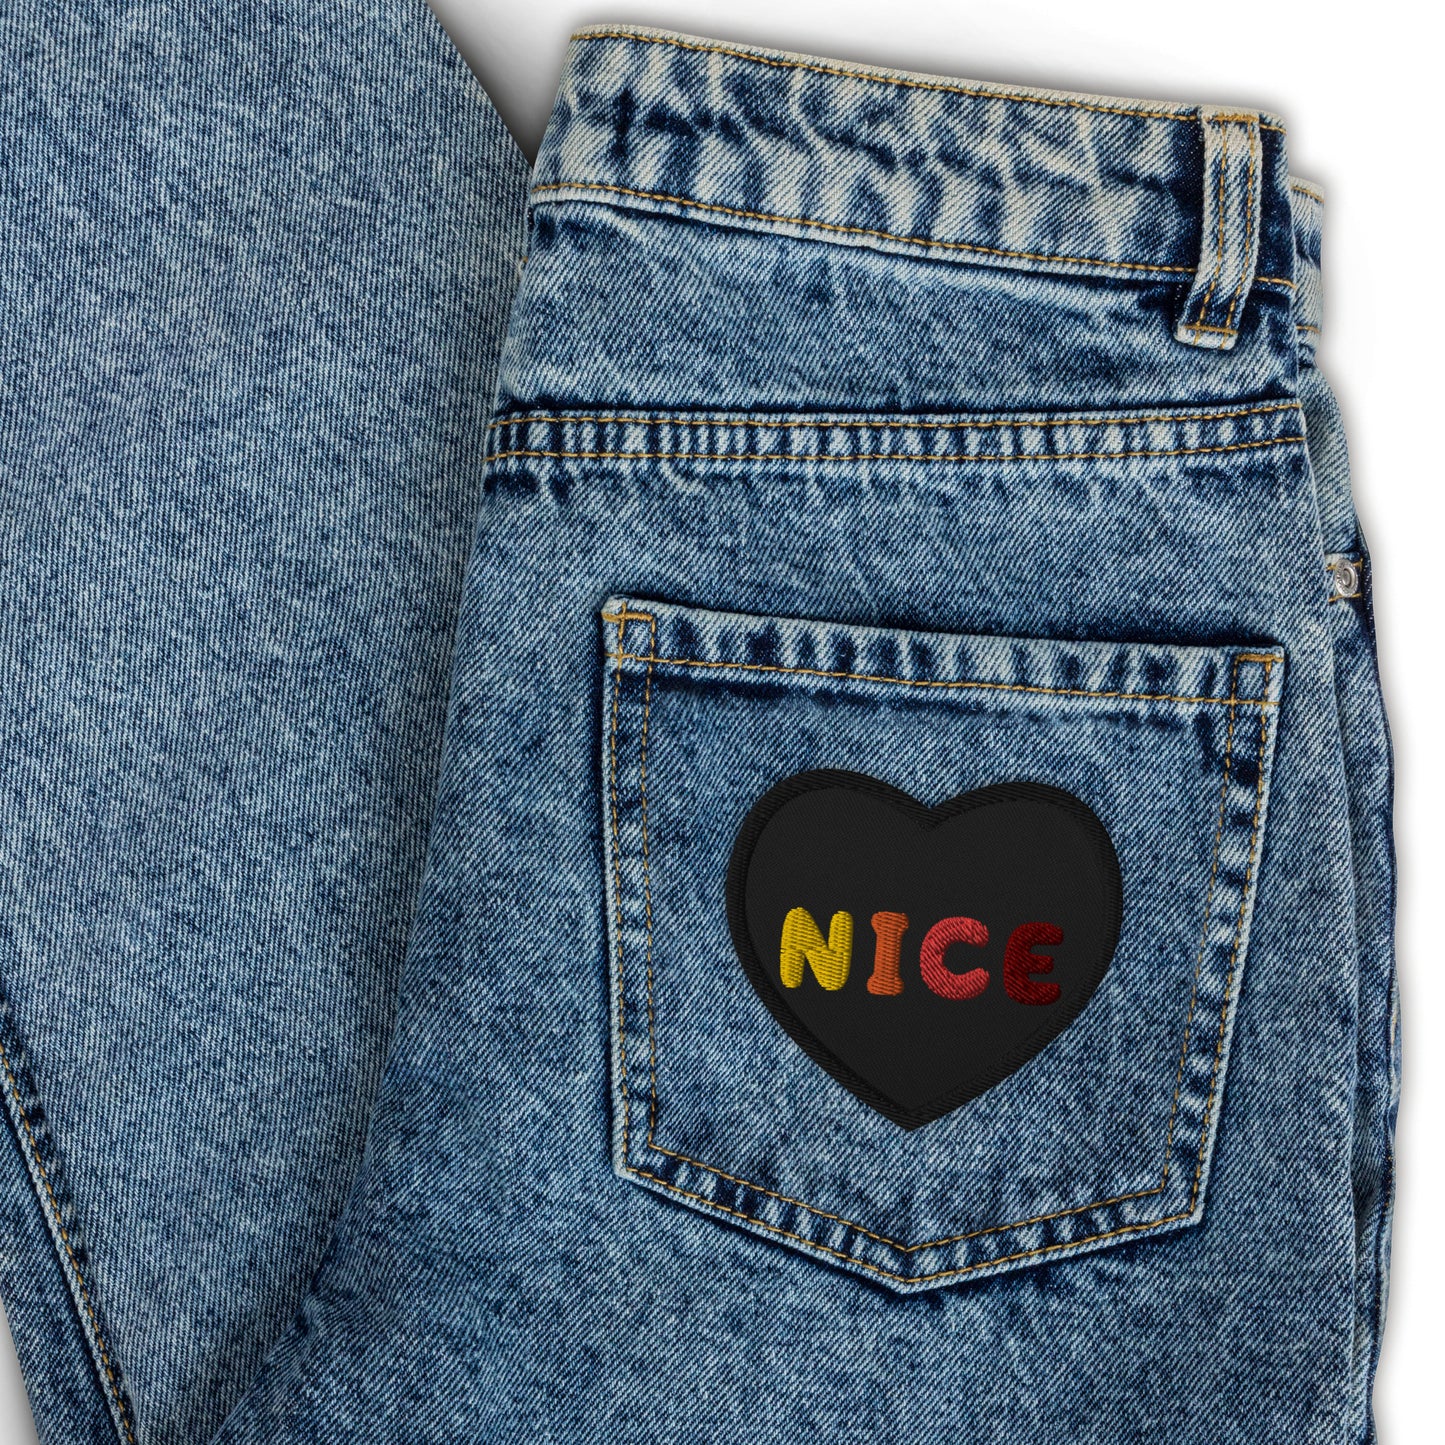 Nice Embroidered Patches 02